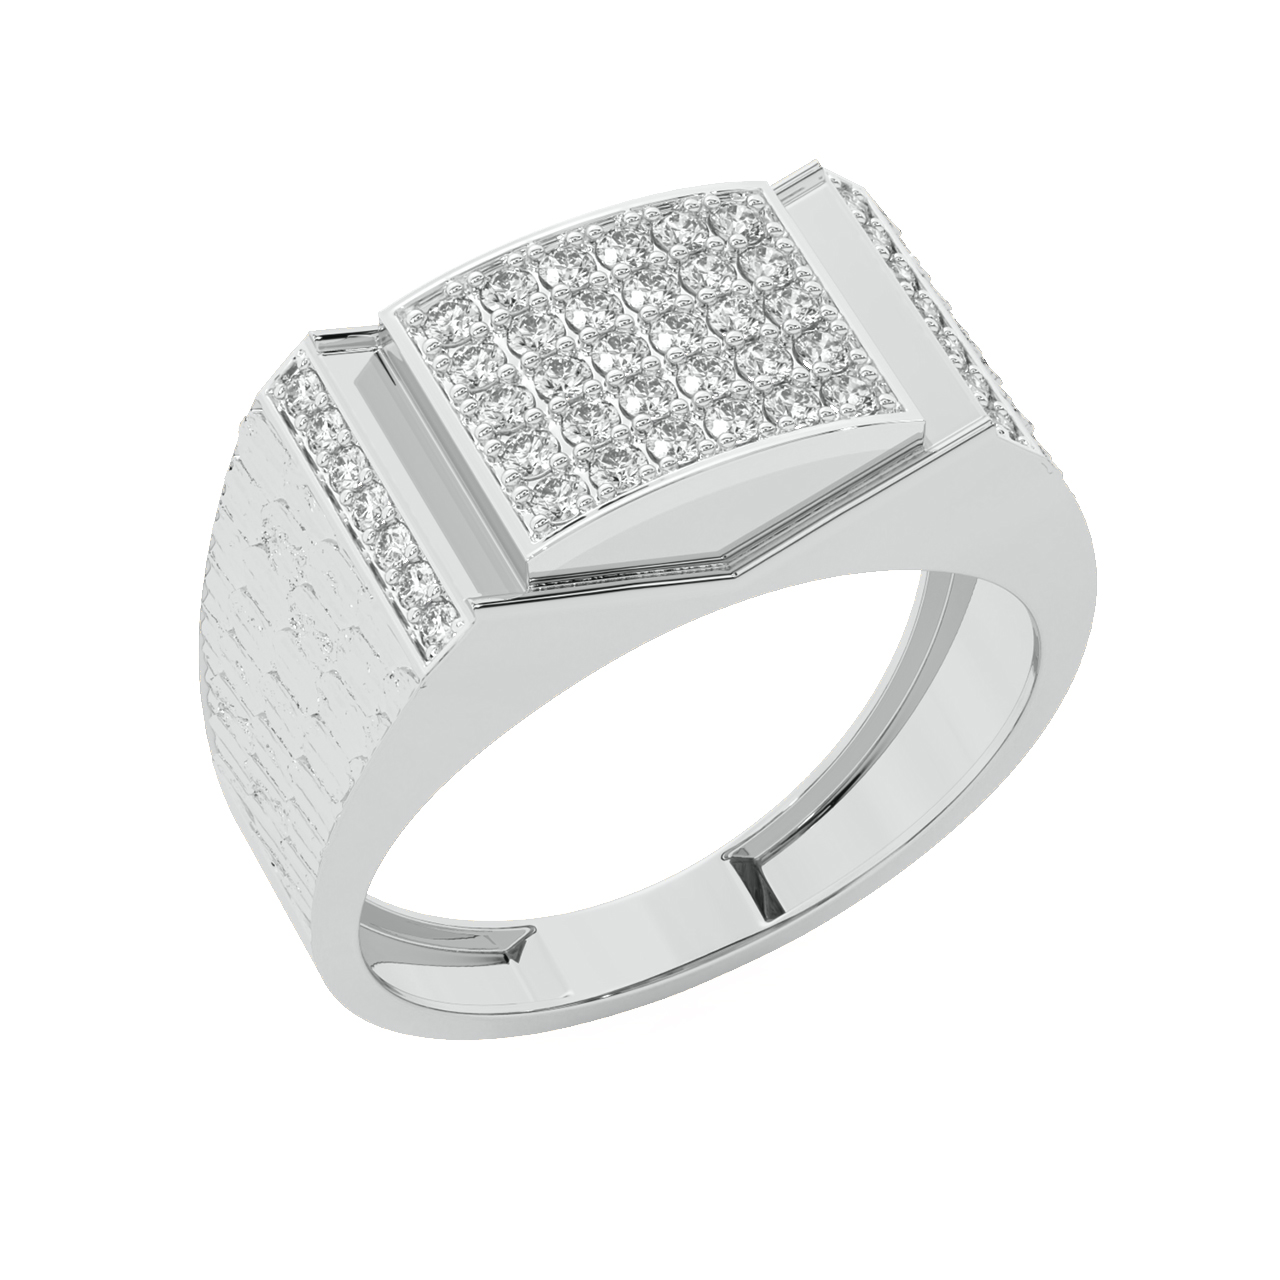 Men's Diamond Watchband Design Ring in Sterling Silver | Gold Boutique